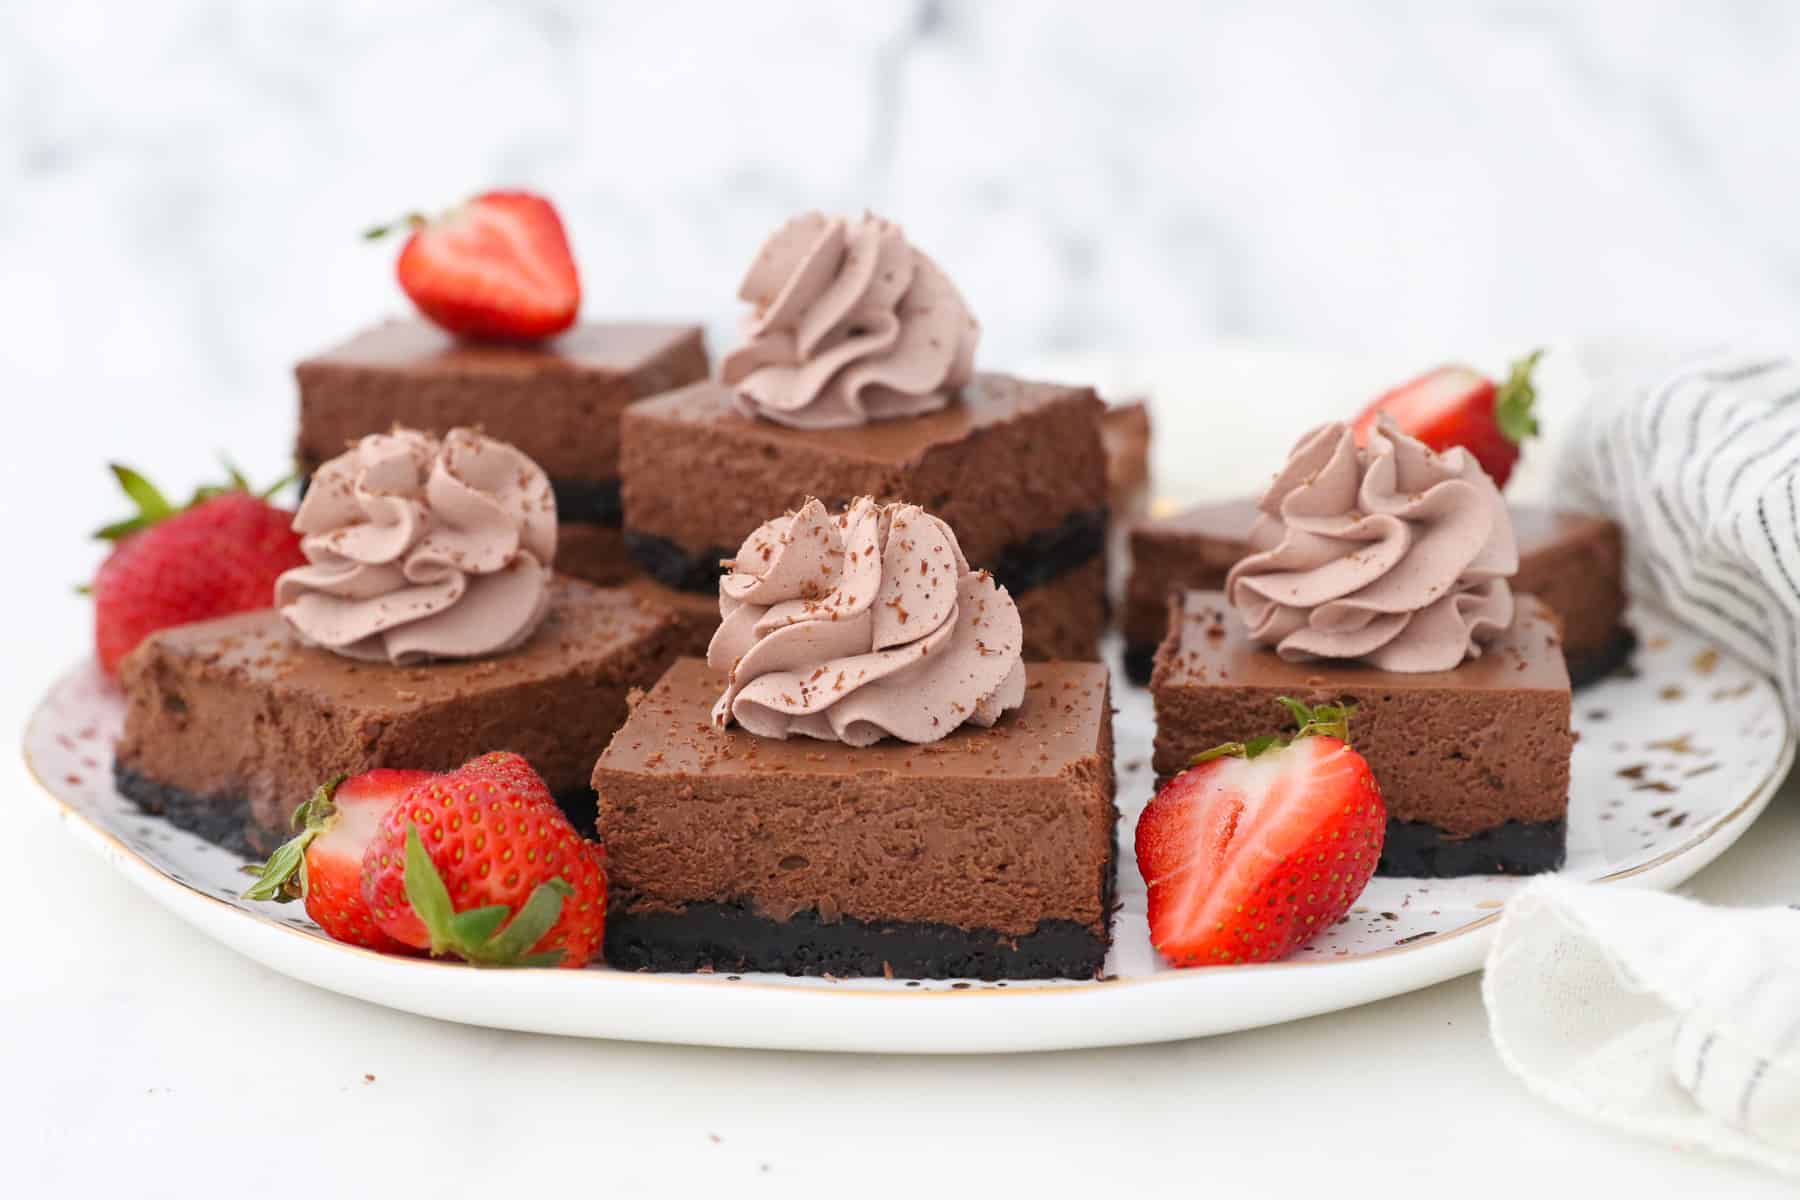 Assorted chocolate cheesecake bars topped with swirls of chocolate whipped cream, next to strawberry halves on a white platter.